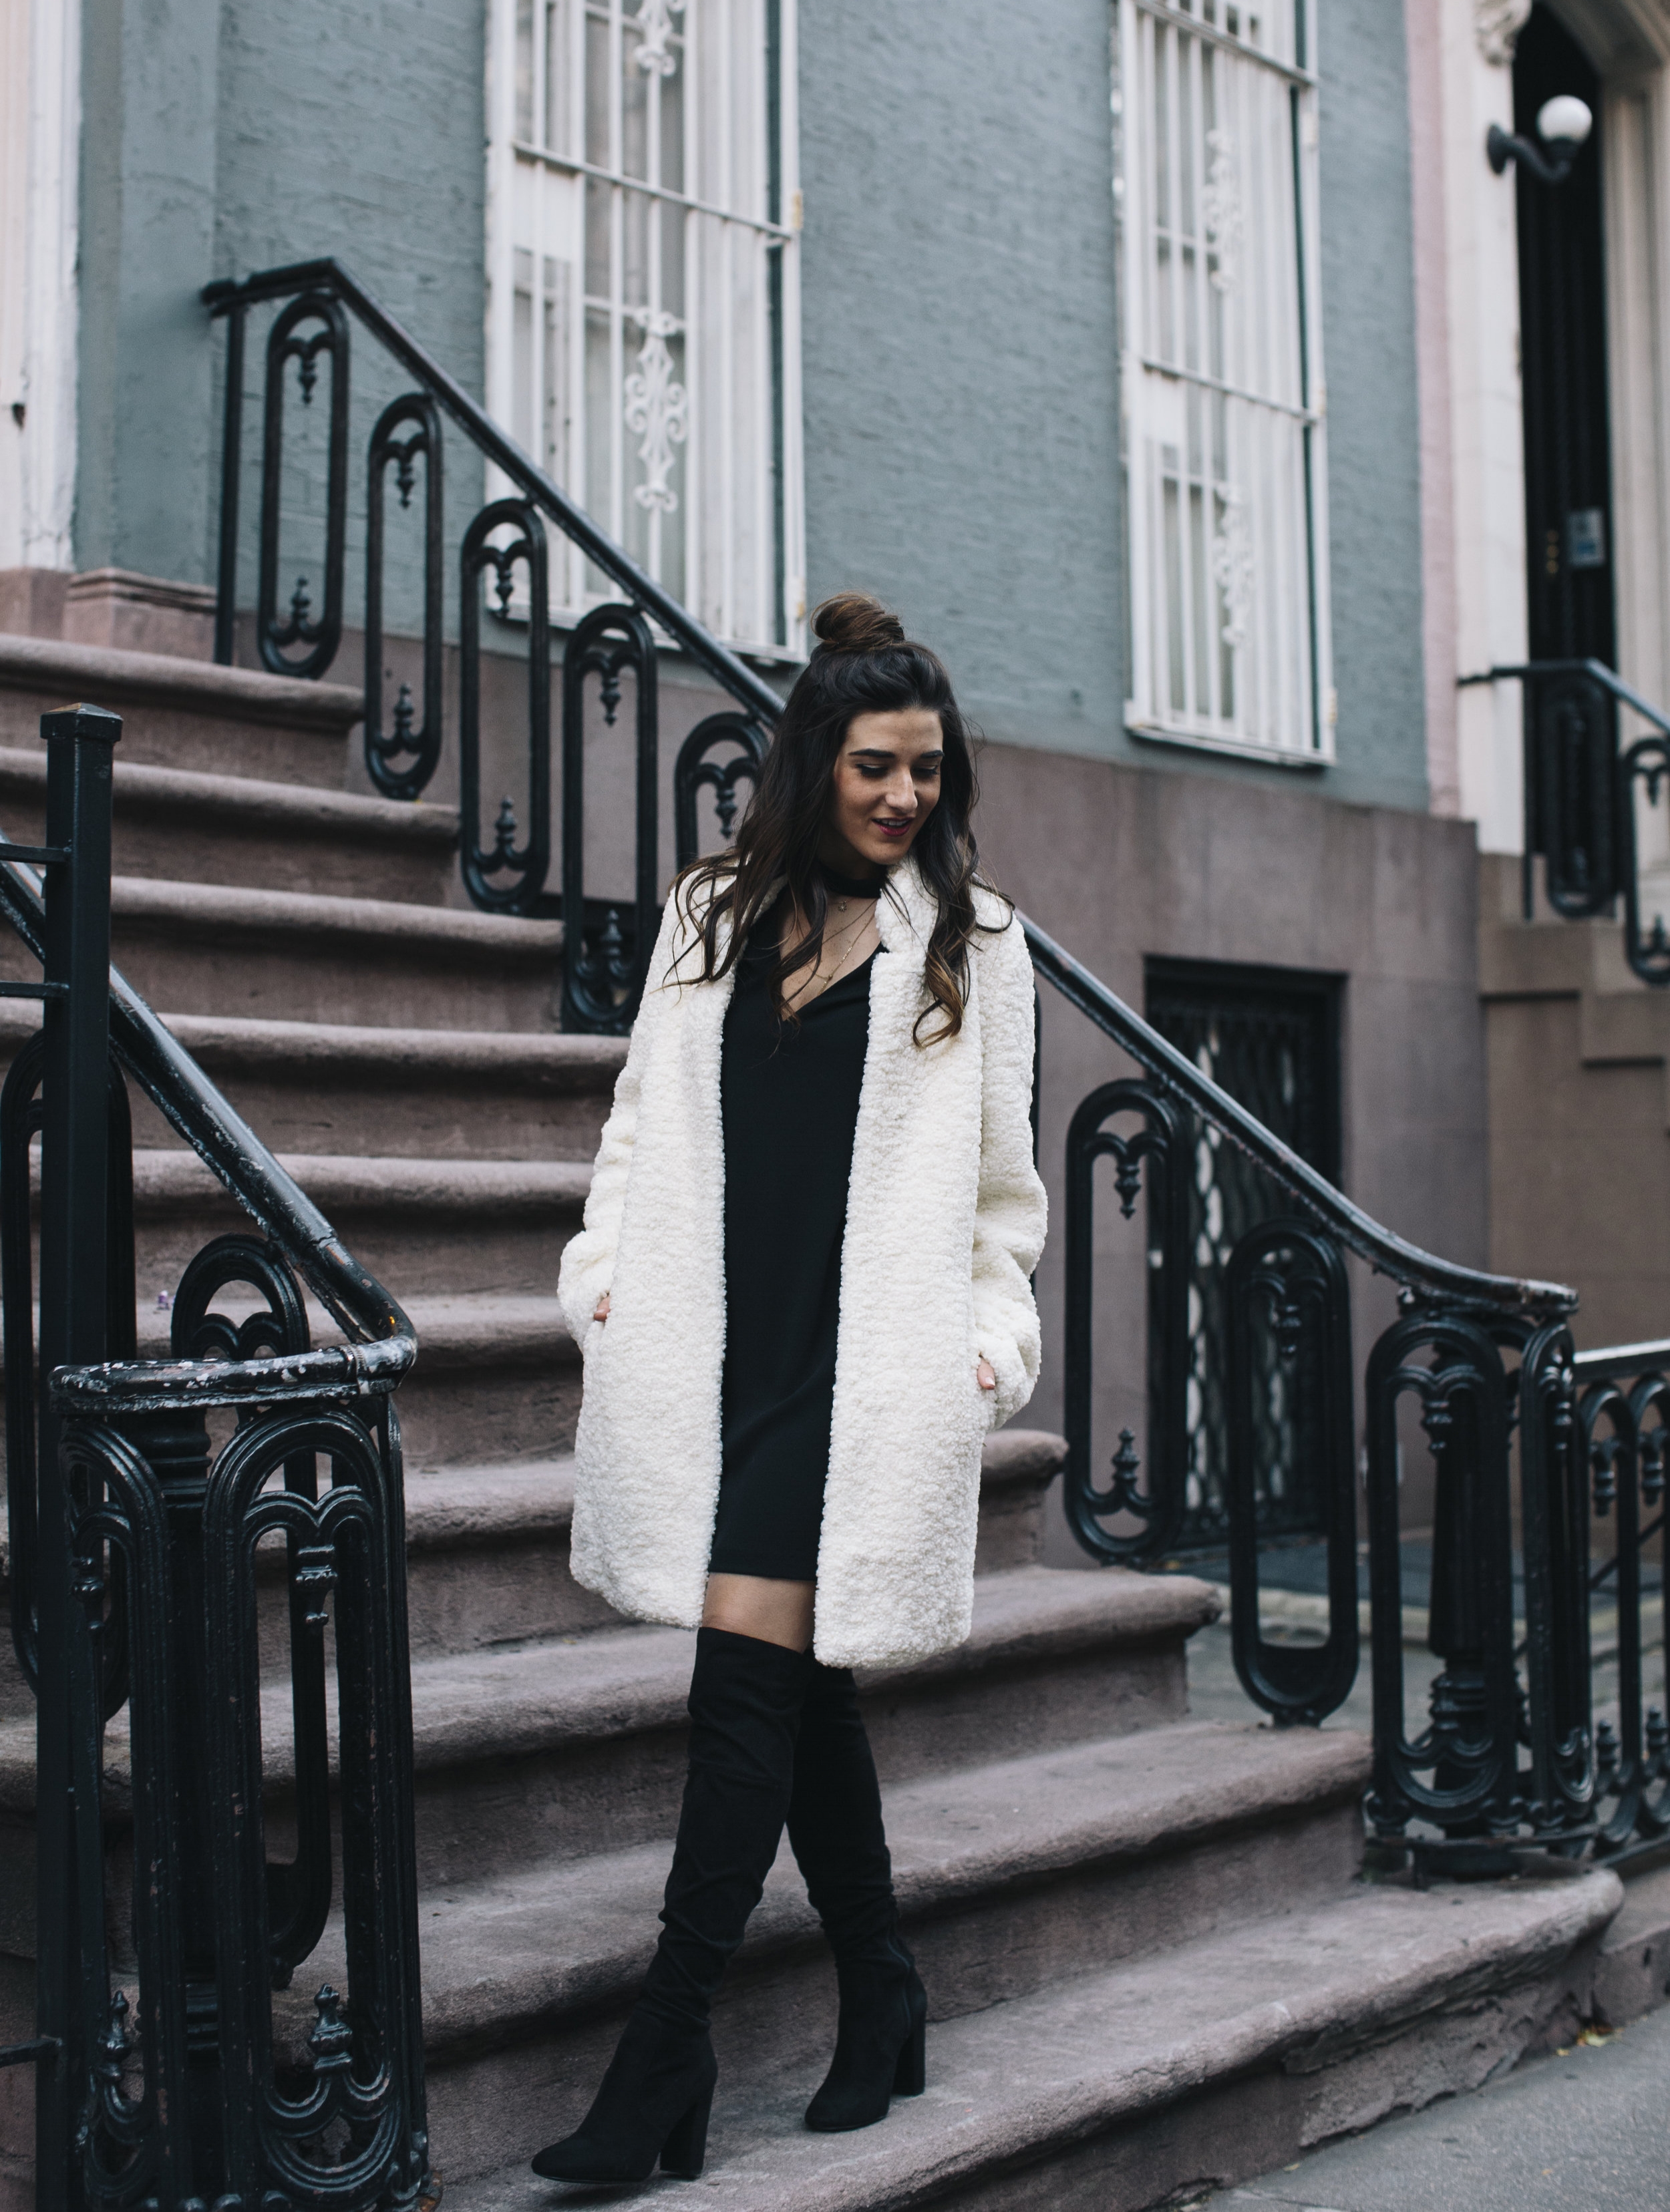 Teddy Bear Coat + OTN Boots How To Avoid Blogger Depression Louboutins & Love Fashion Blog Esther Santer NYC Street Style Blogger Outfit OOTD Trendy Ivanka Trump Nordstrom Bloomingdales Black Dress Zara Pretty Online Shopping Shoes Bun Wear Women Girl.jpg